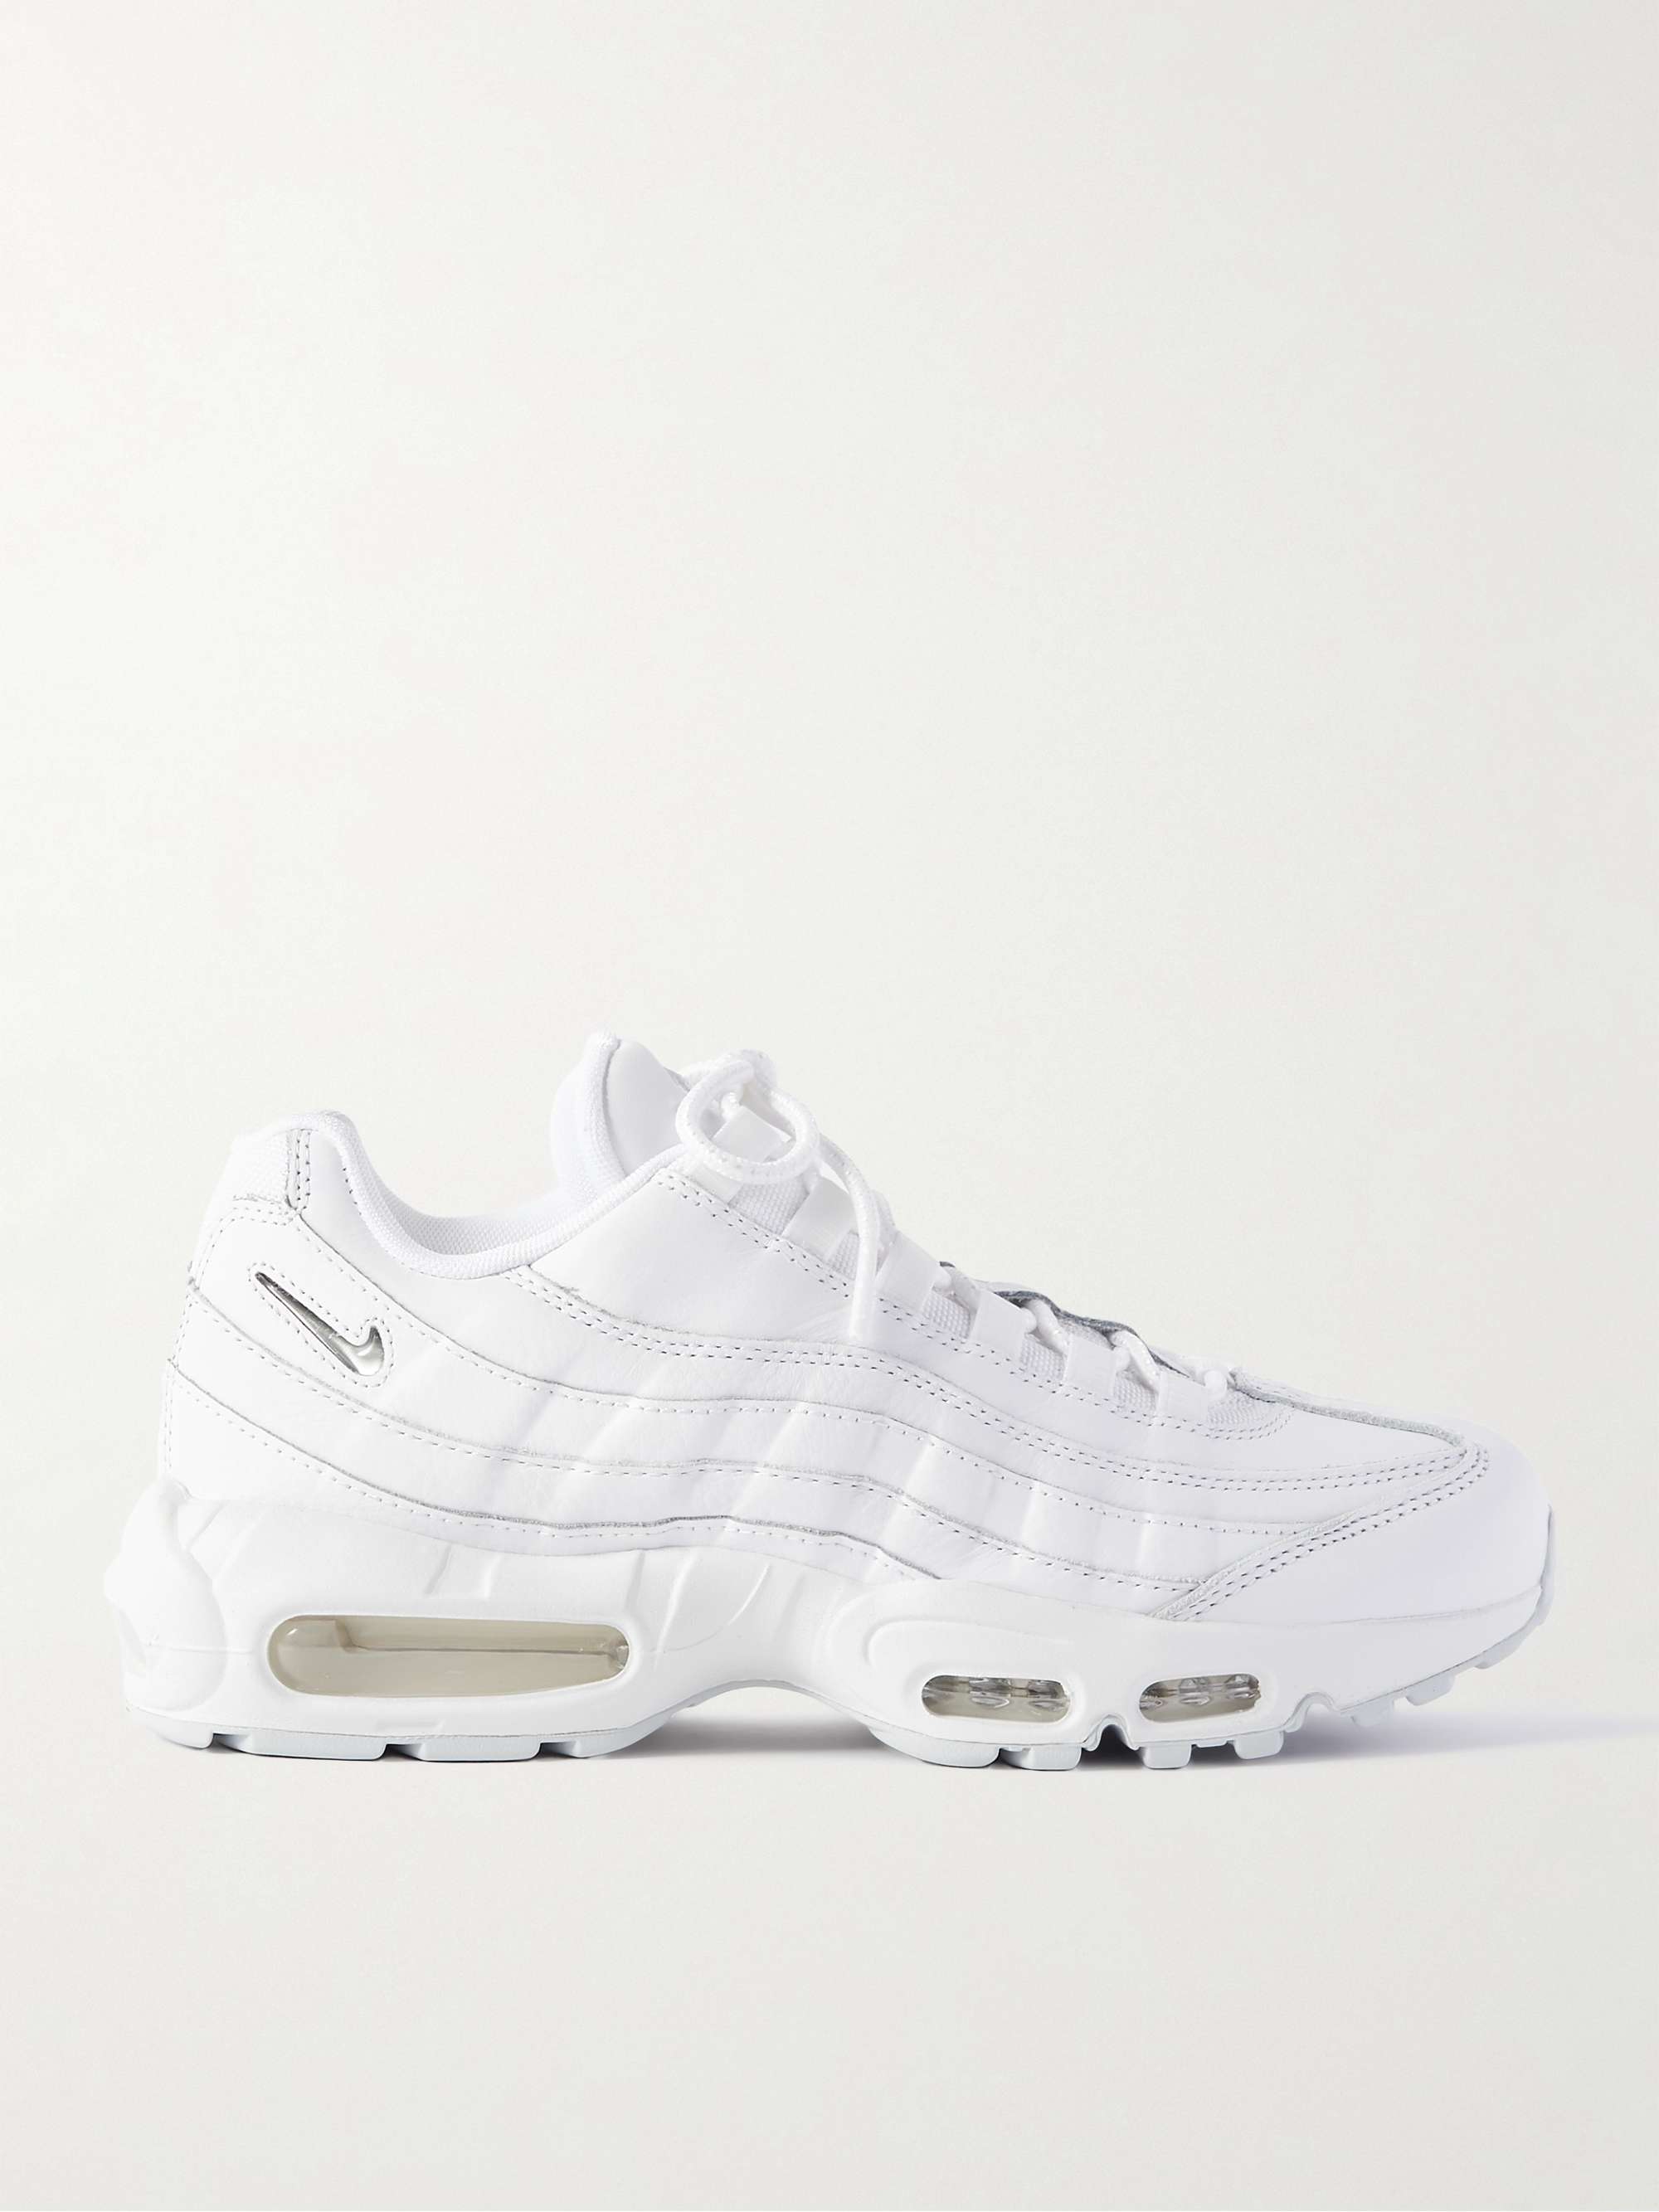 NIKE Air Max 95 Leather Sneakers | MR PORTER